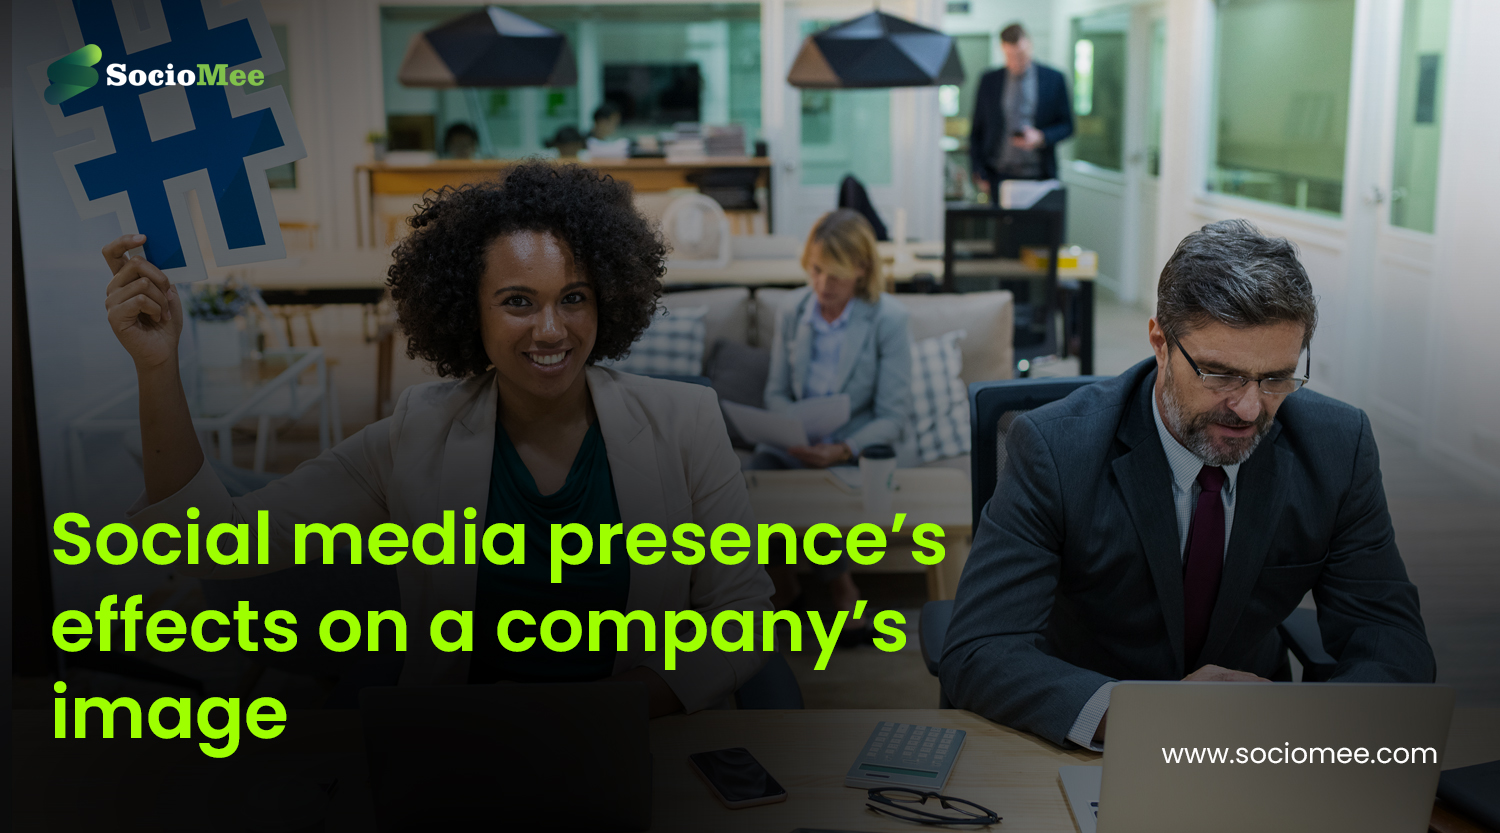 Explore social media presence’s effects on a company’s image